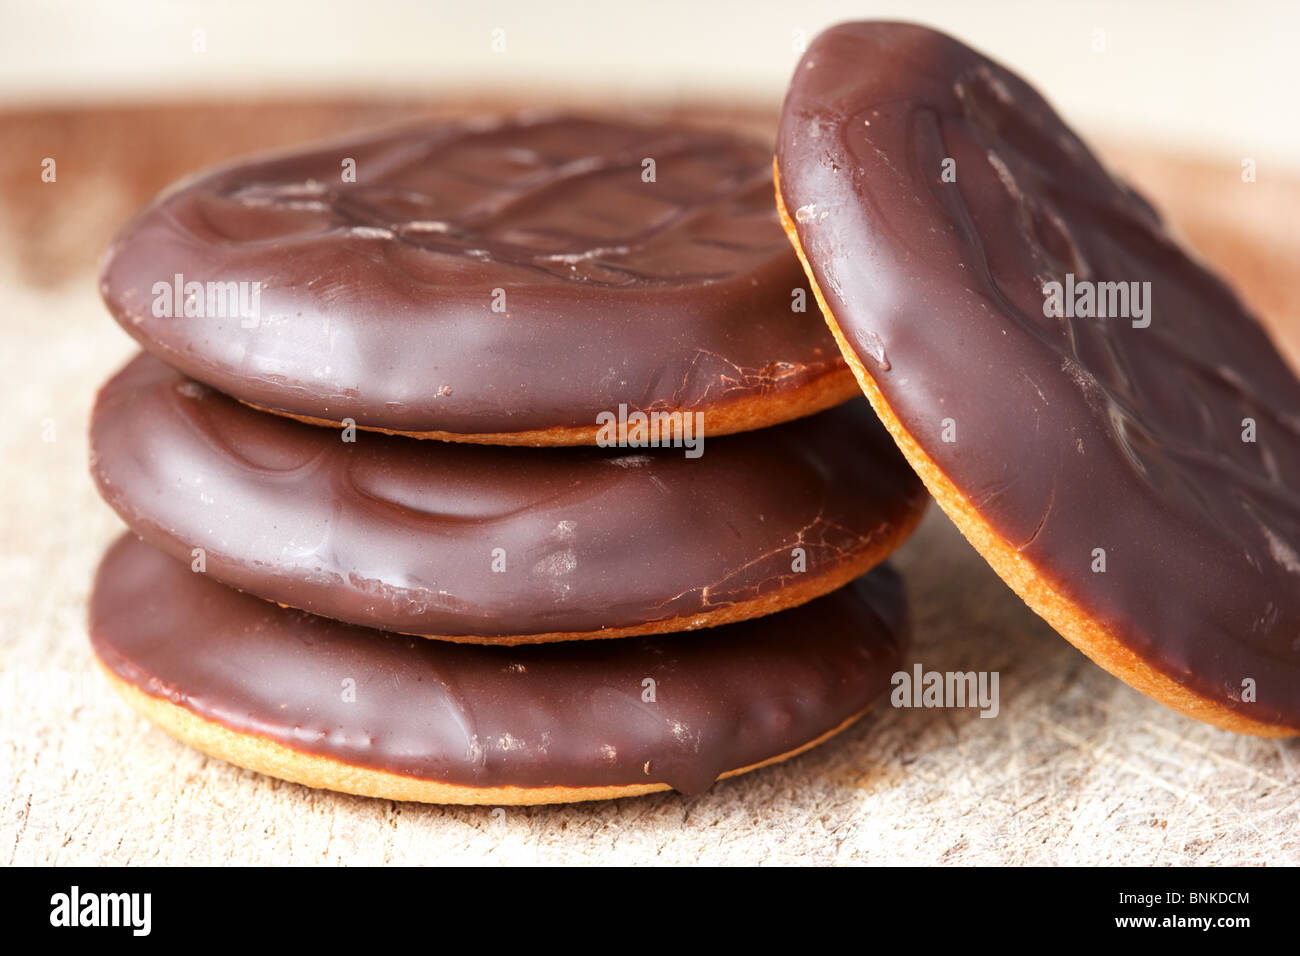 pile of chocolate covered cheap shops own brand jaffa cakes style jaffa cake Stock Photo